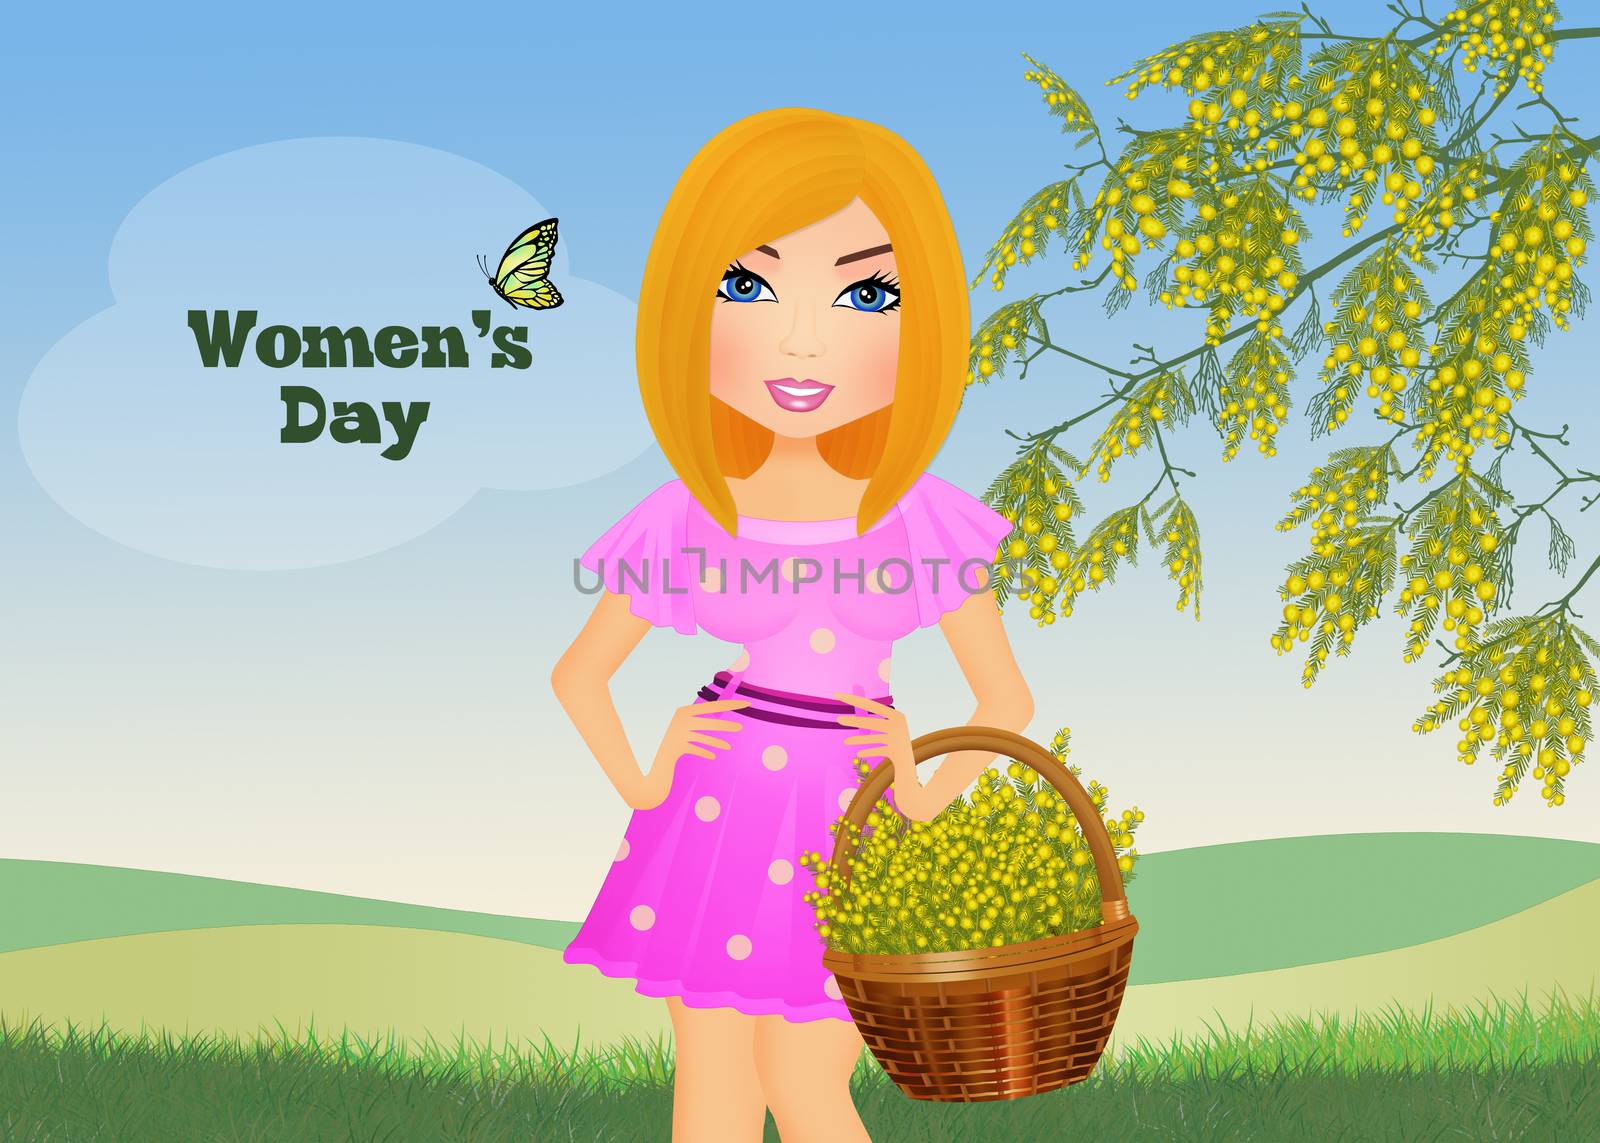 illustration of women's day with blonde girl with mimosa flowers